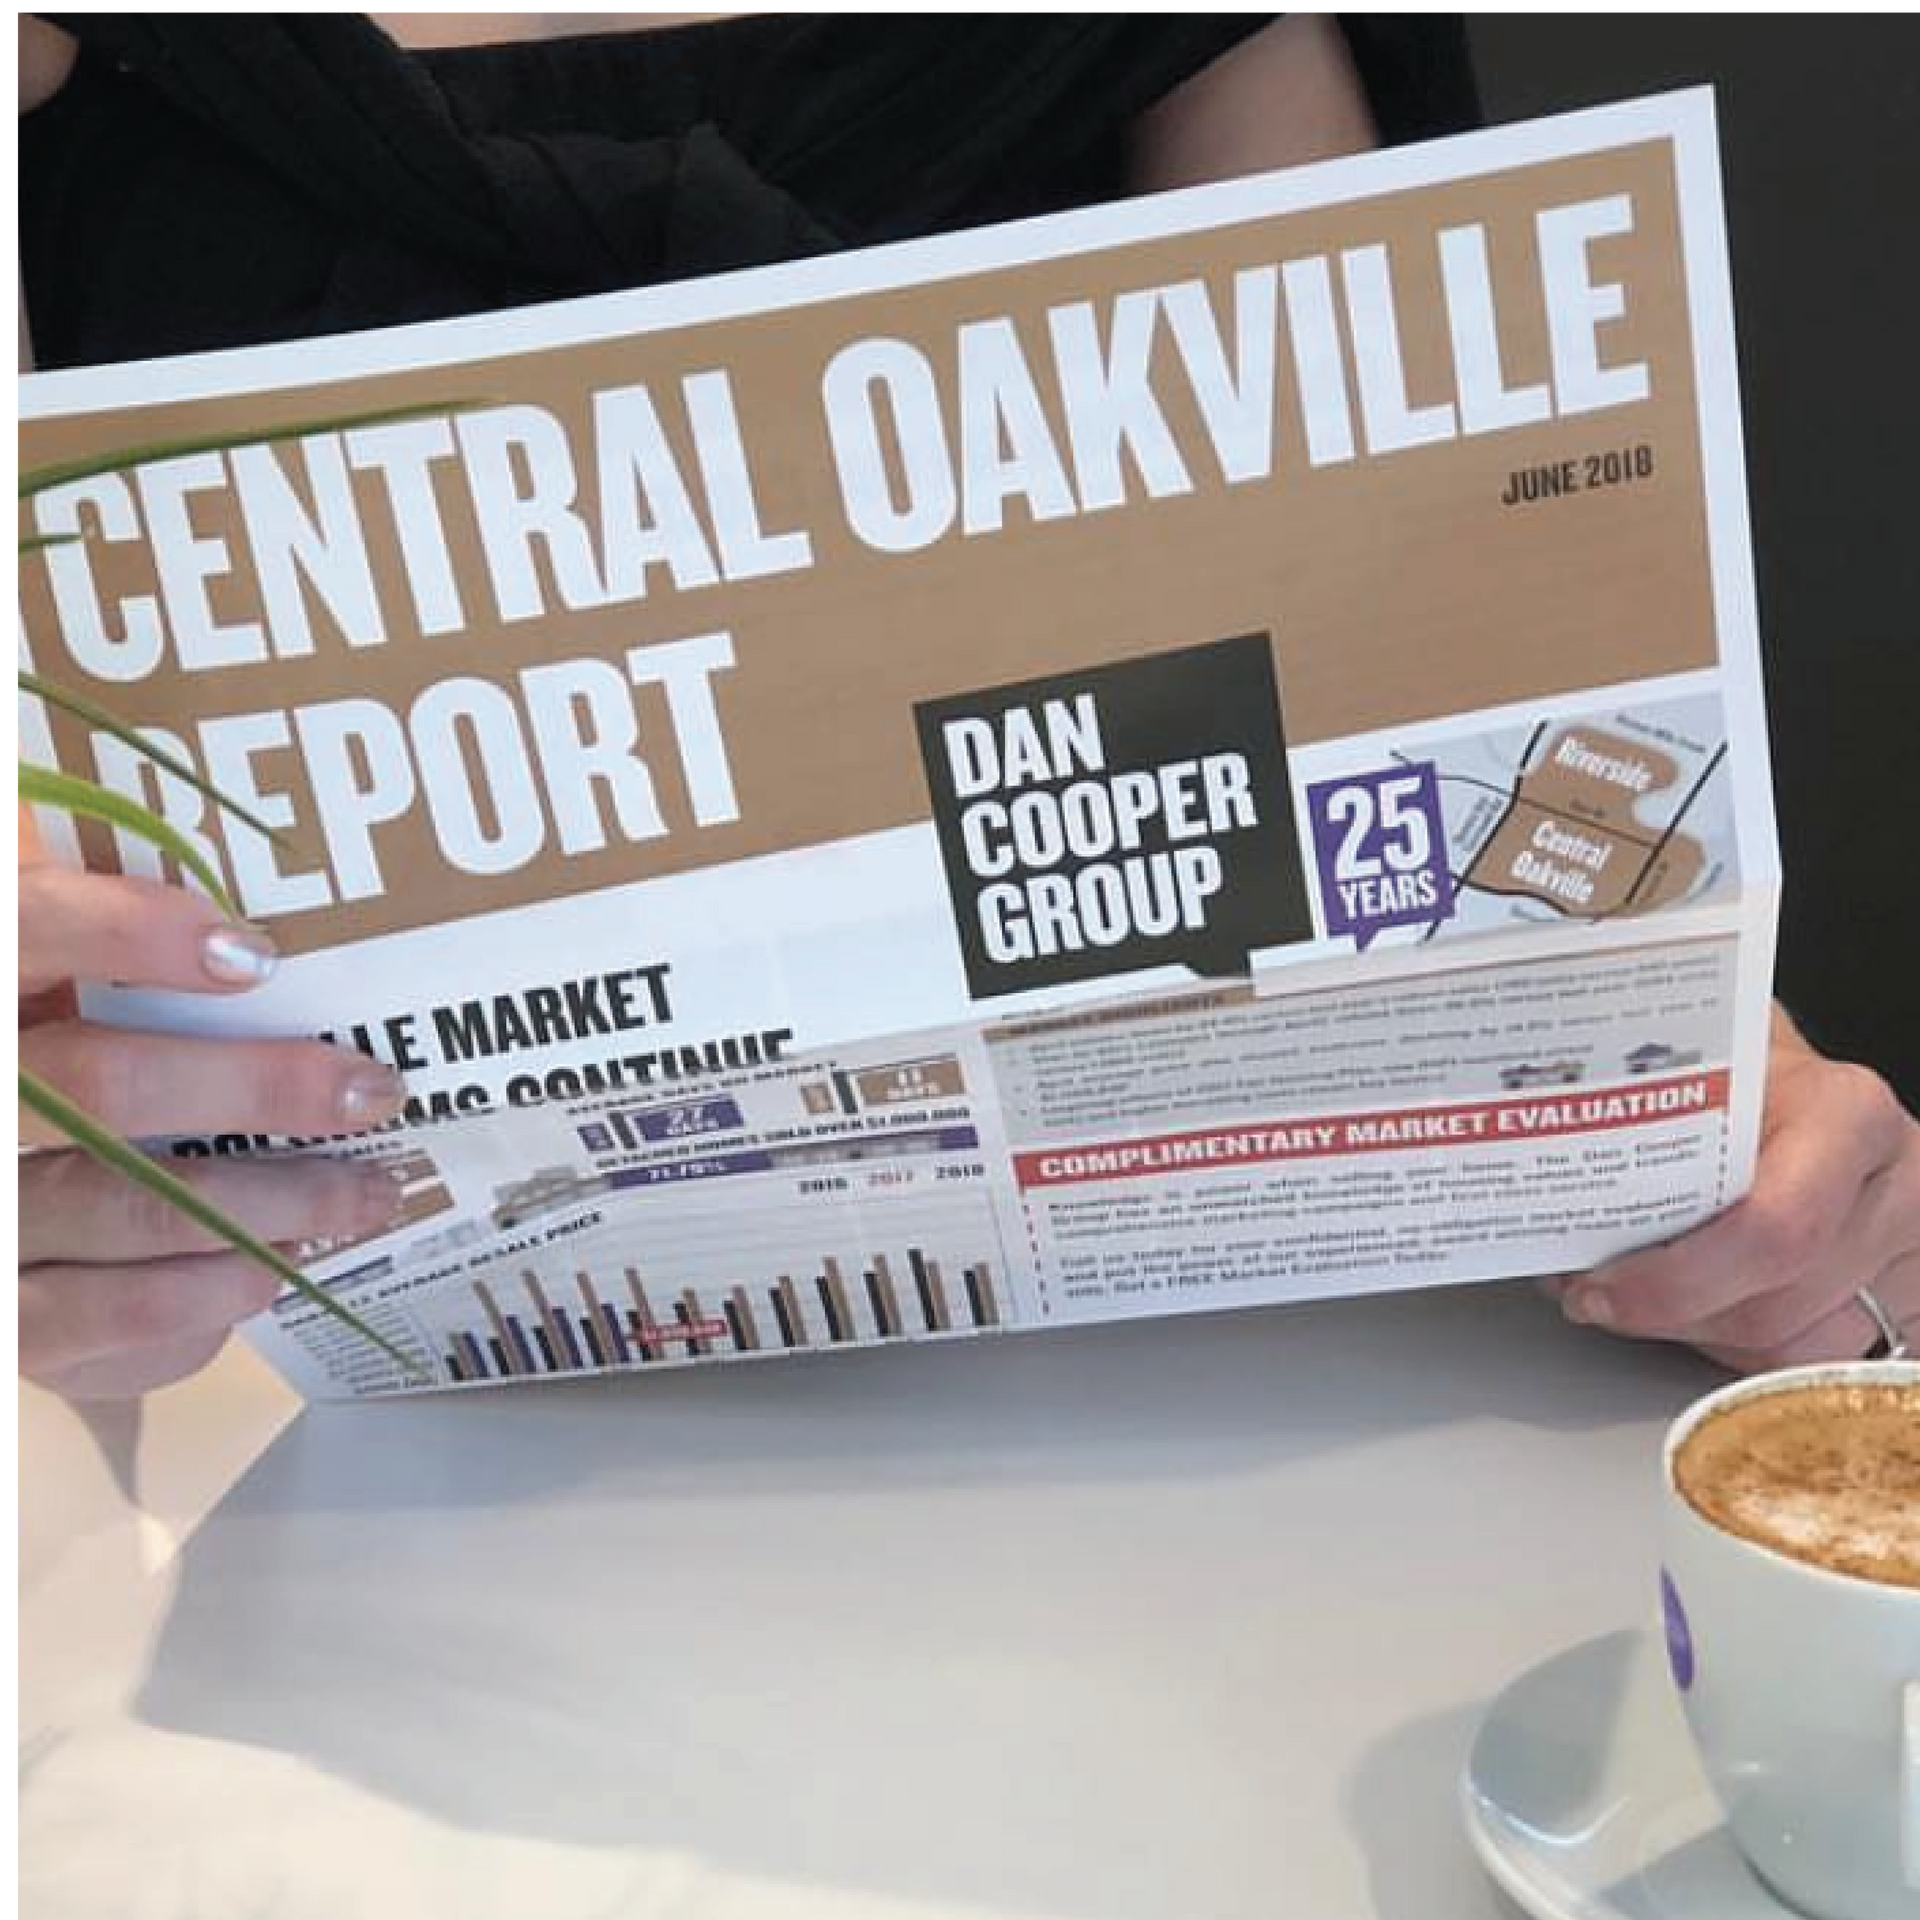 A person is reading the central Oakville report